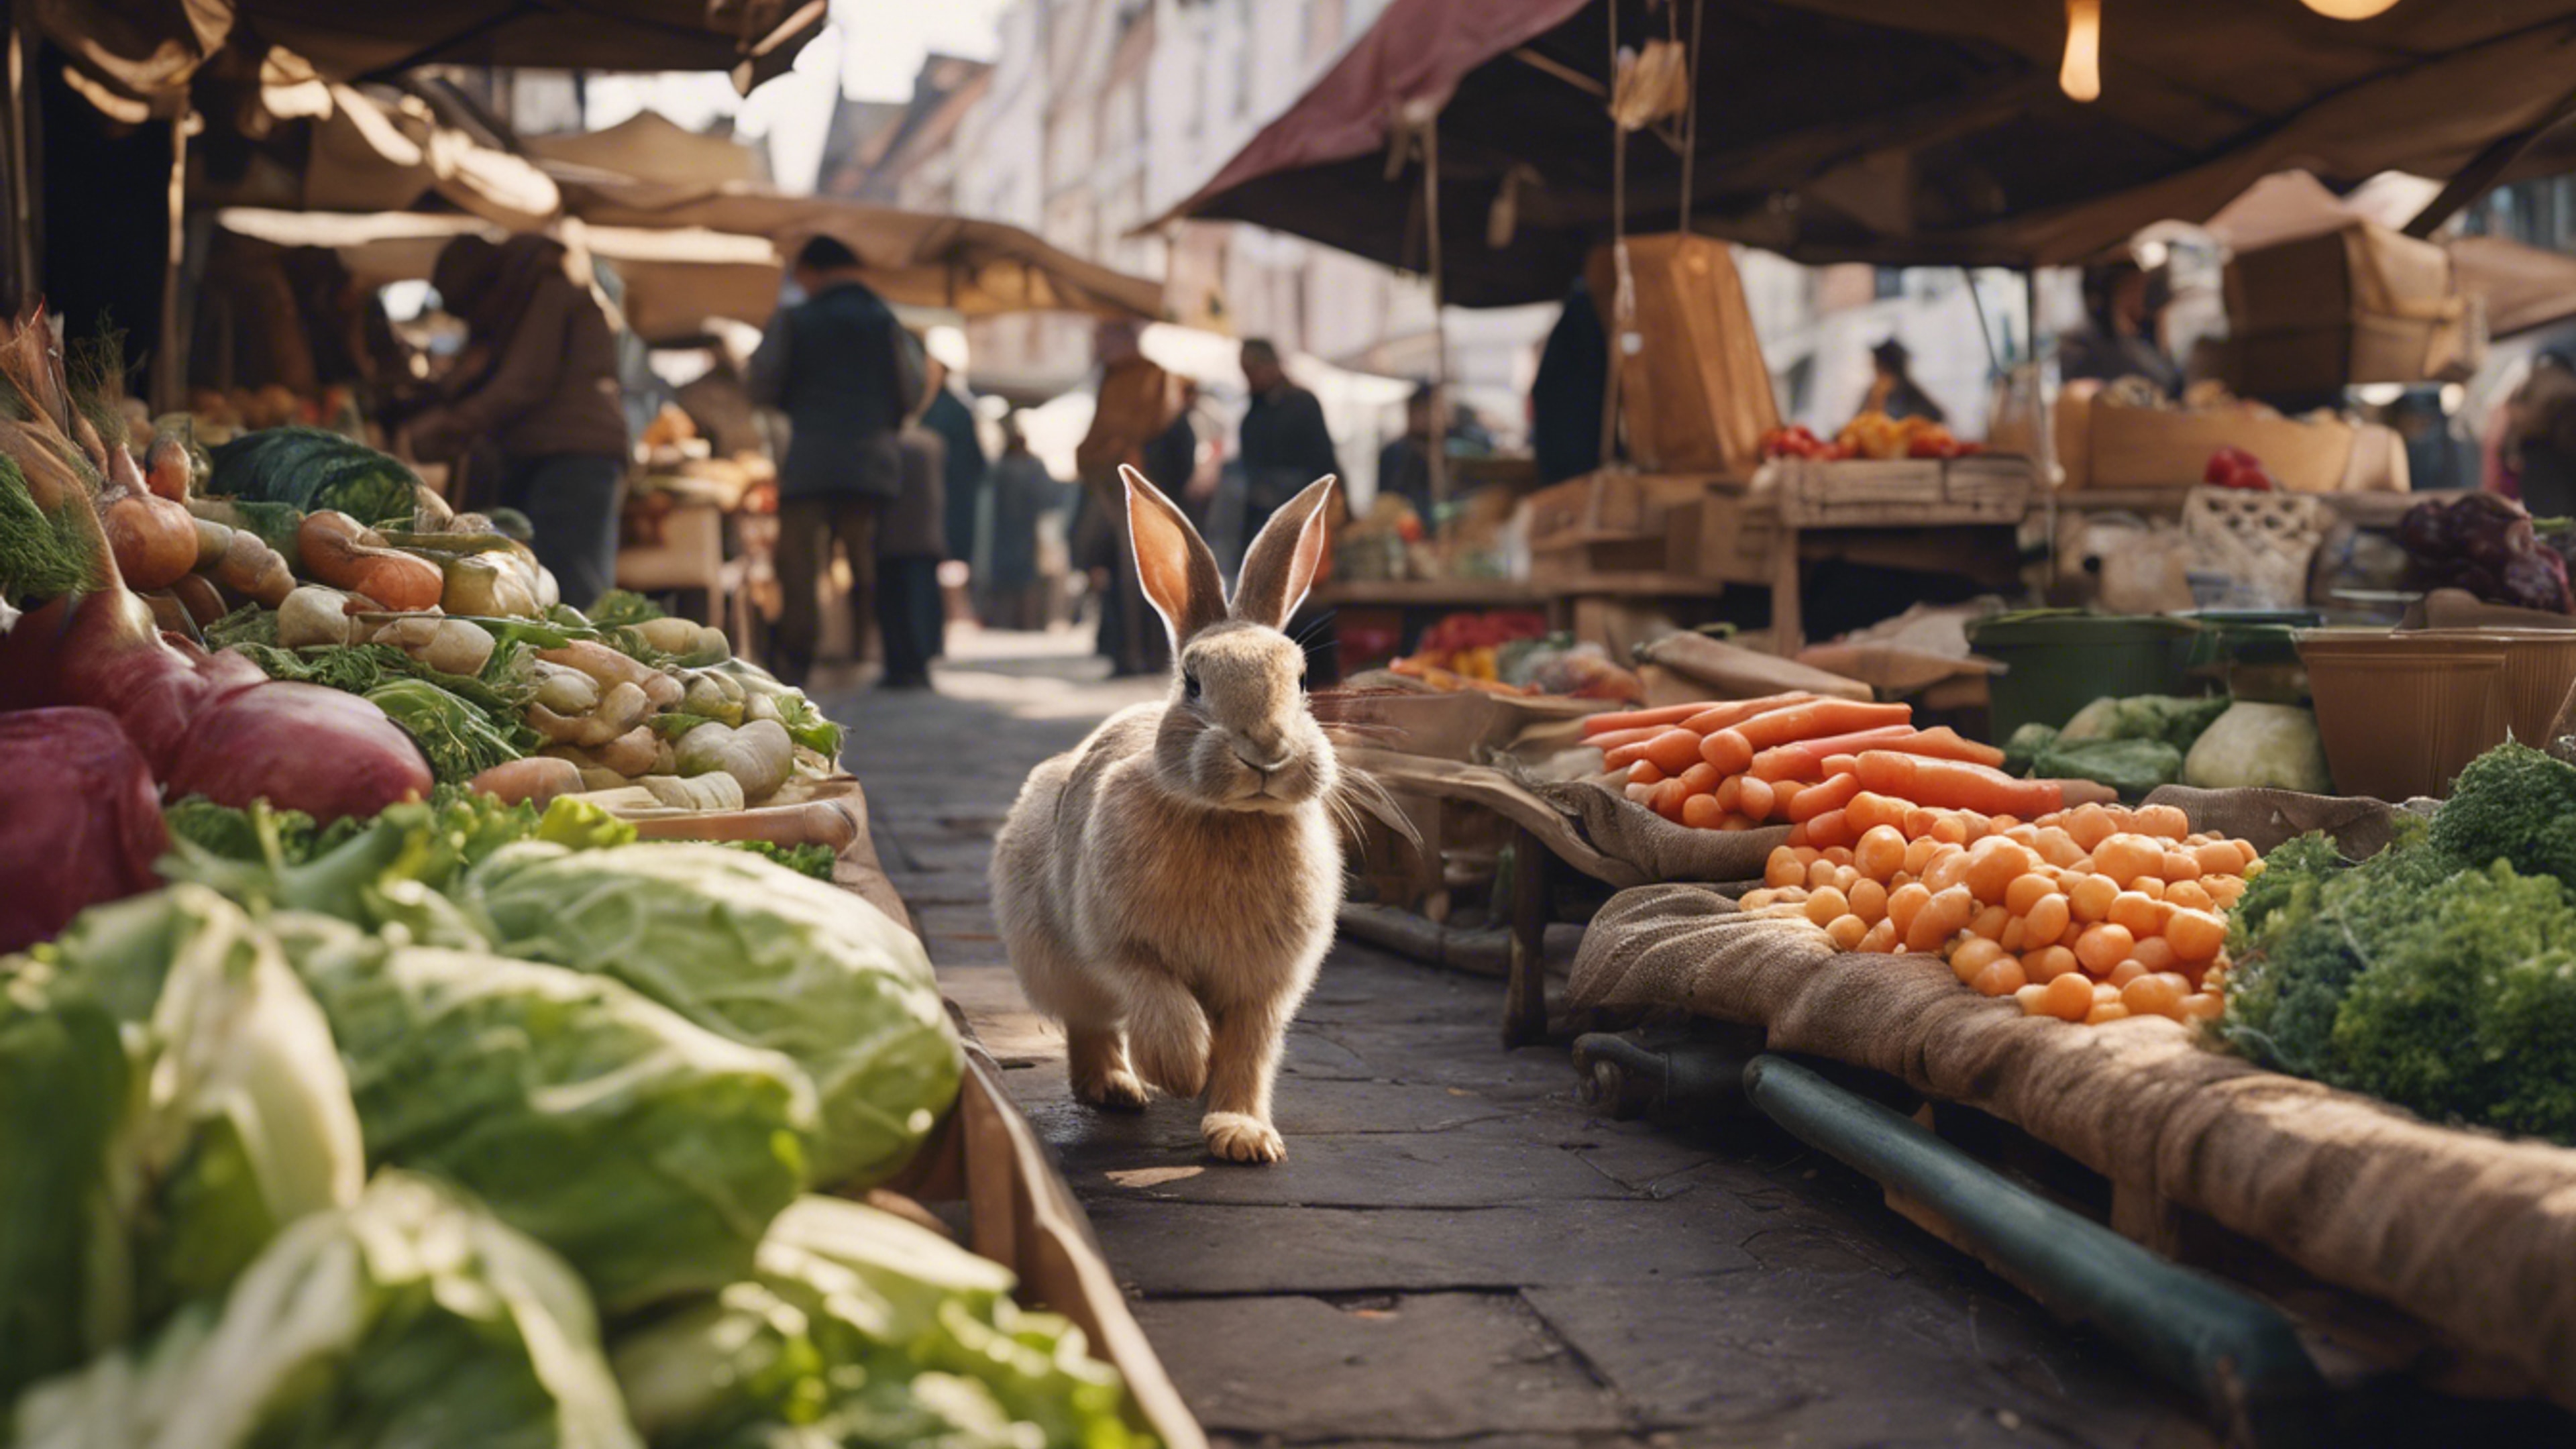 A rabbit running a vegetable stall in an old-fashioned market. 牆紙[95b88699917c48c6bf62]